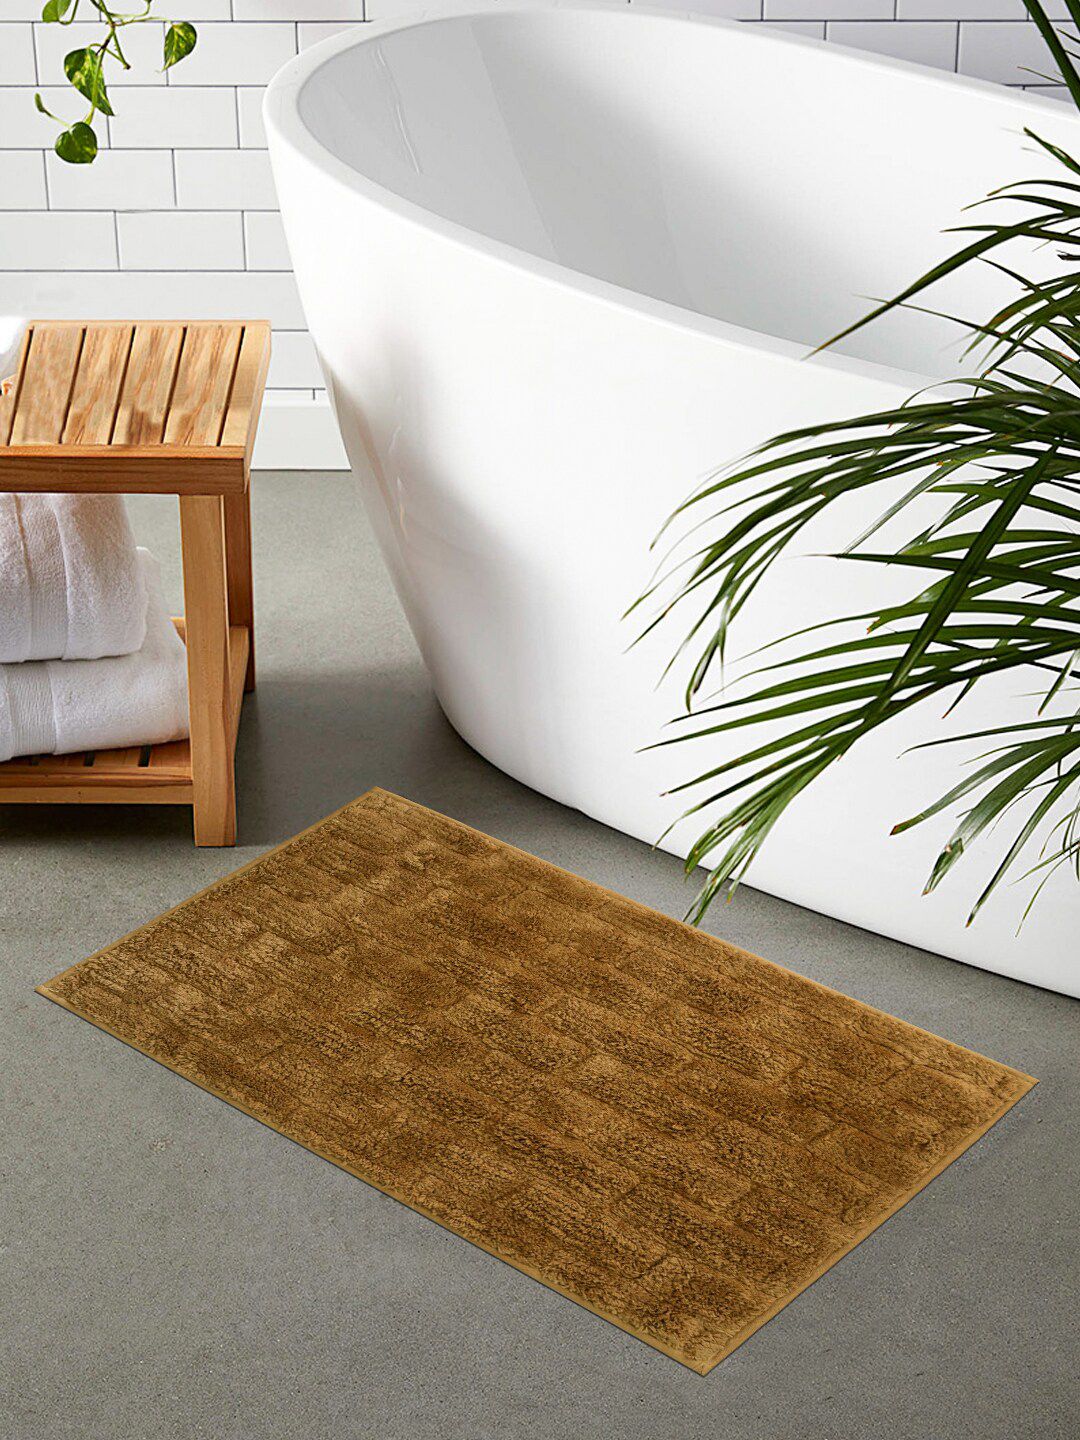 Shresmo Gold Solid 2200 GSM Cotton Bath Rug Price in India